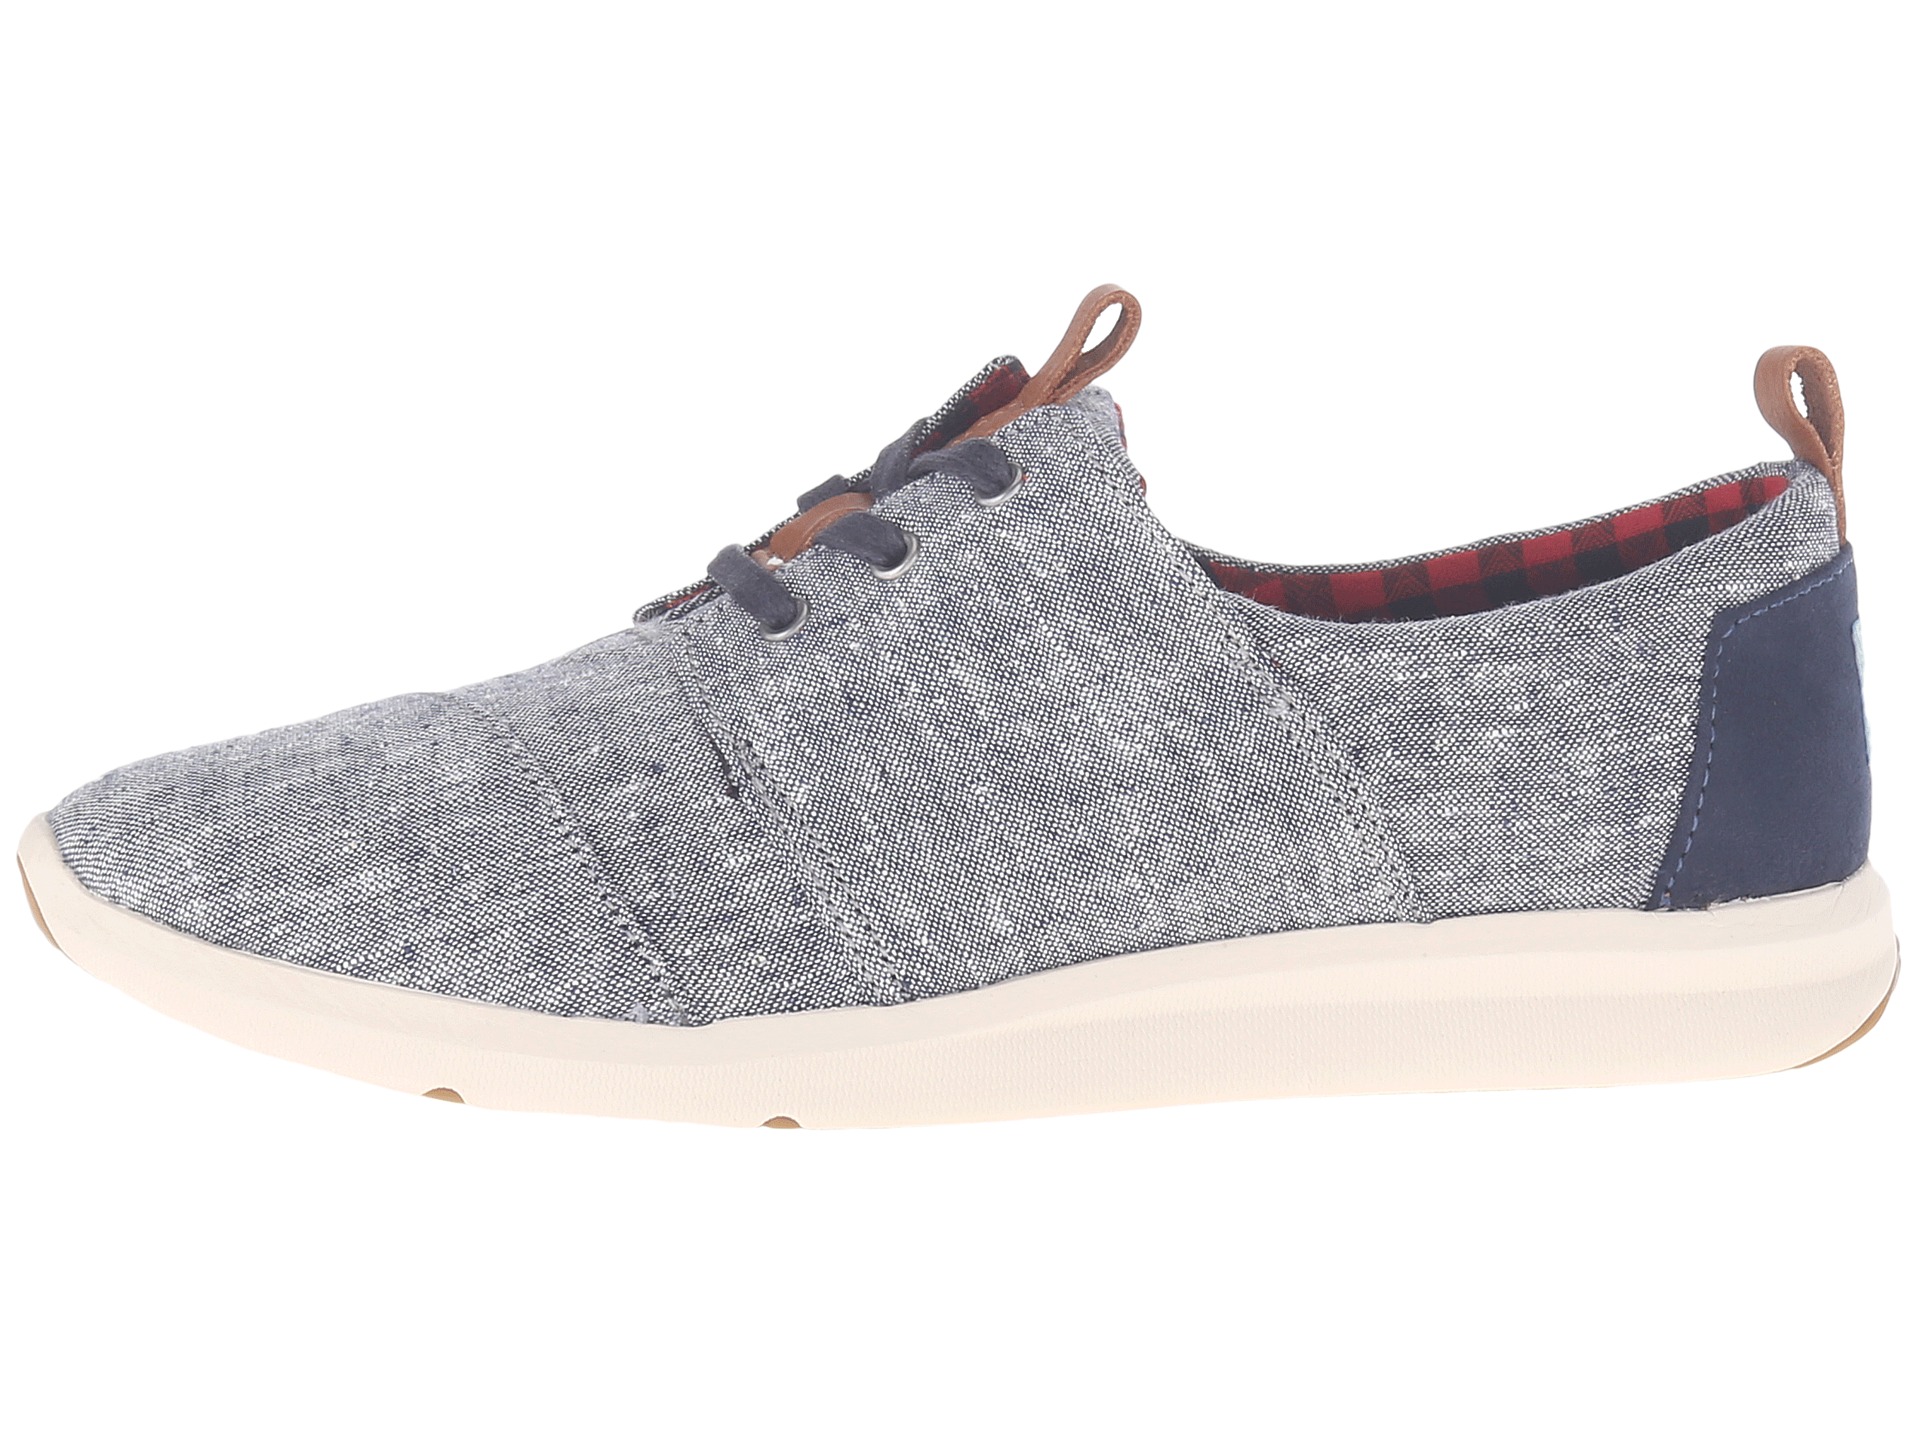 TOMS Del Rey Sneaker Blue Chambray - Zappos.com Free Shipping BOTH Ways